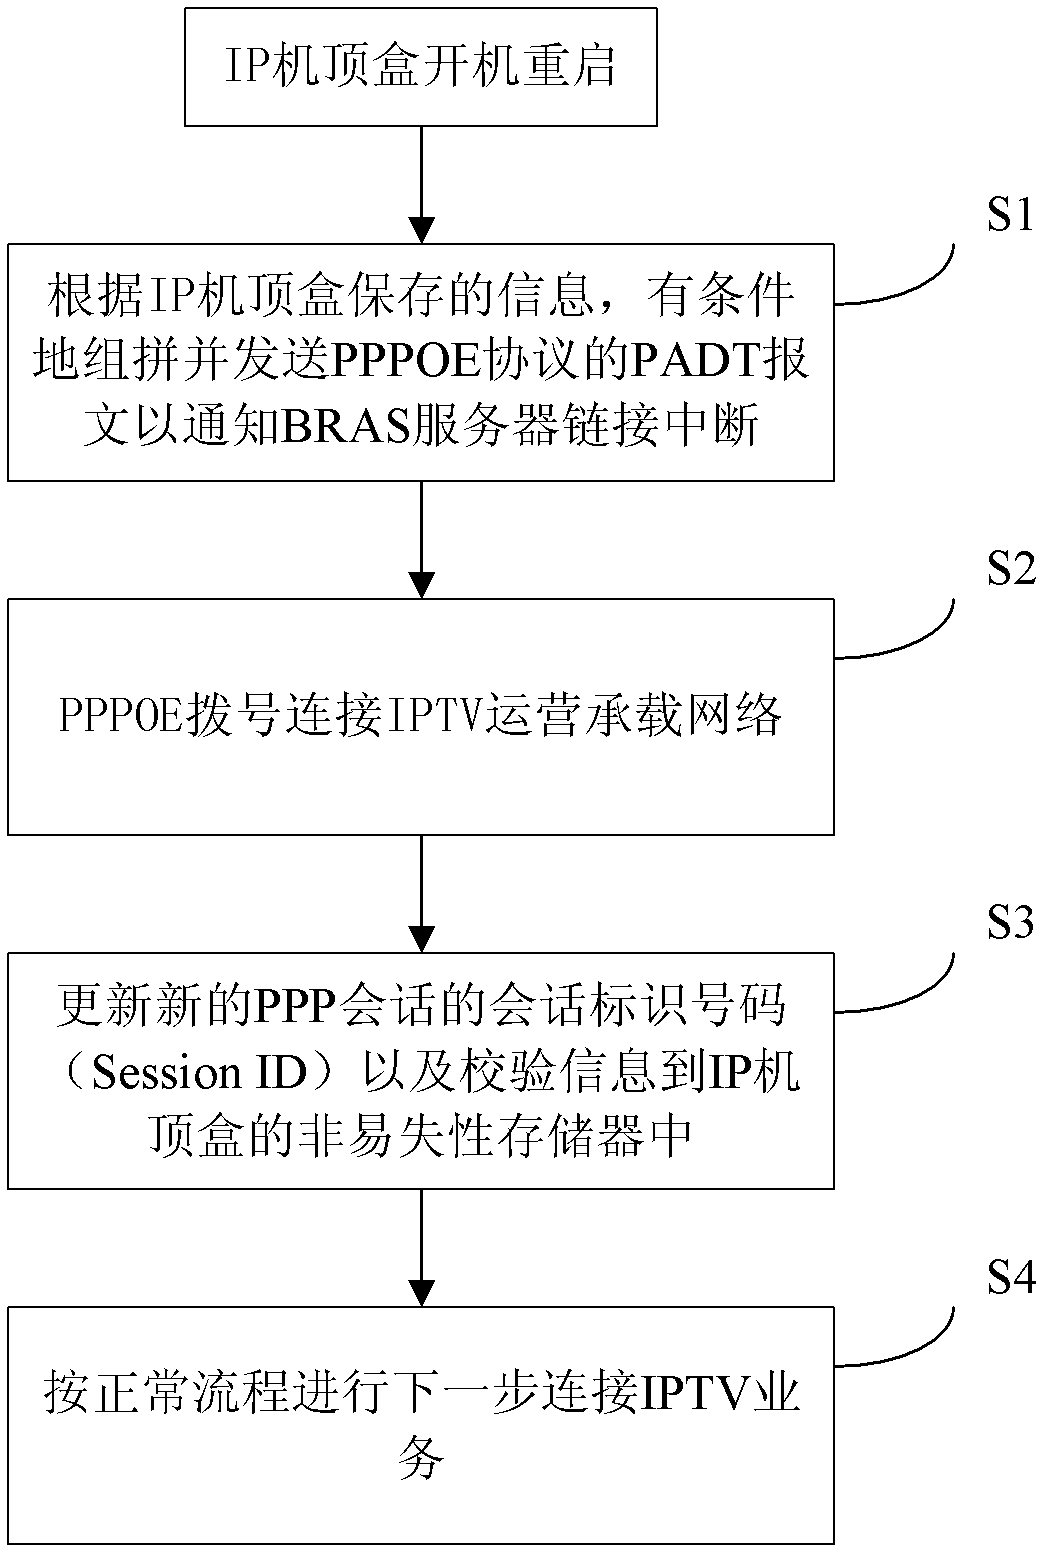 Handling method for PPPOE (point-to-point protocol over Ethernet) access network anomaly of IP (Internet protocol) set top box